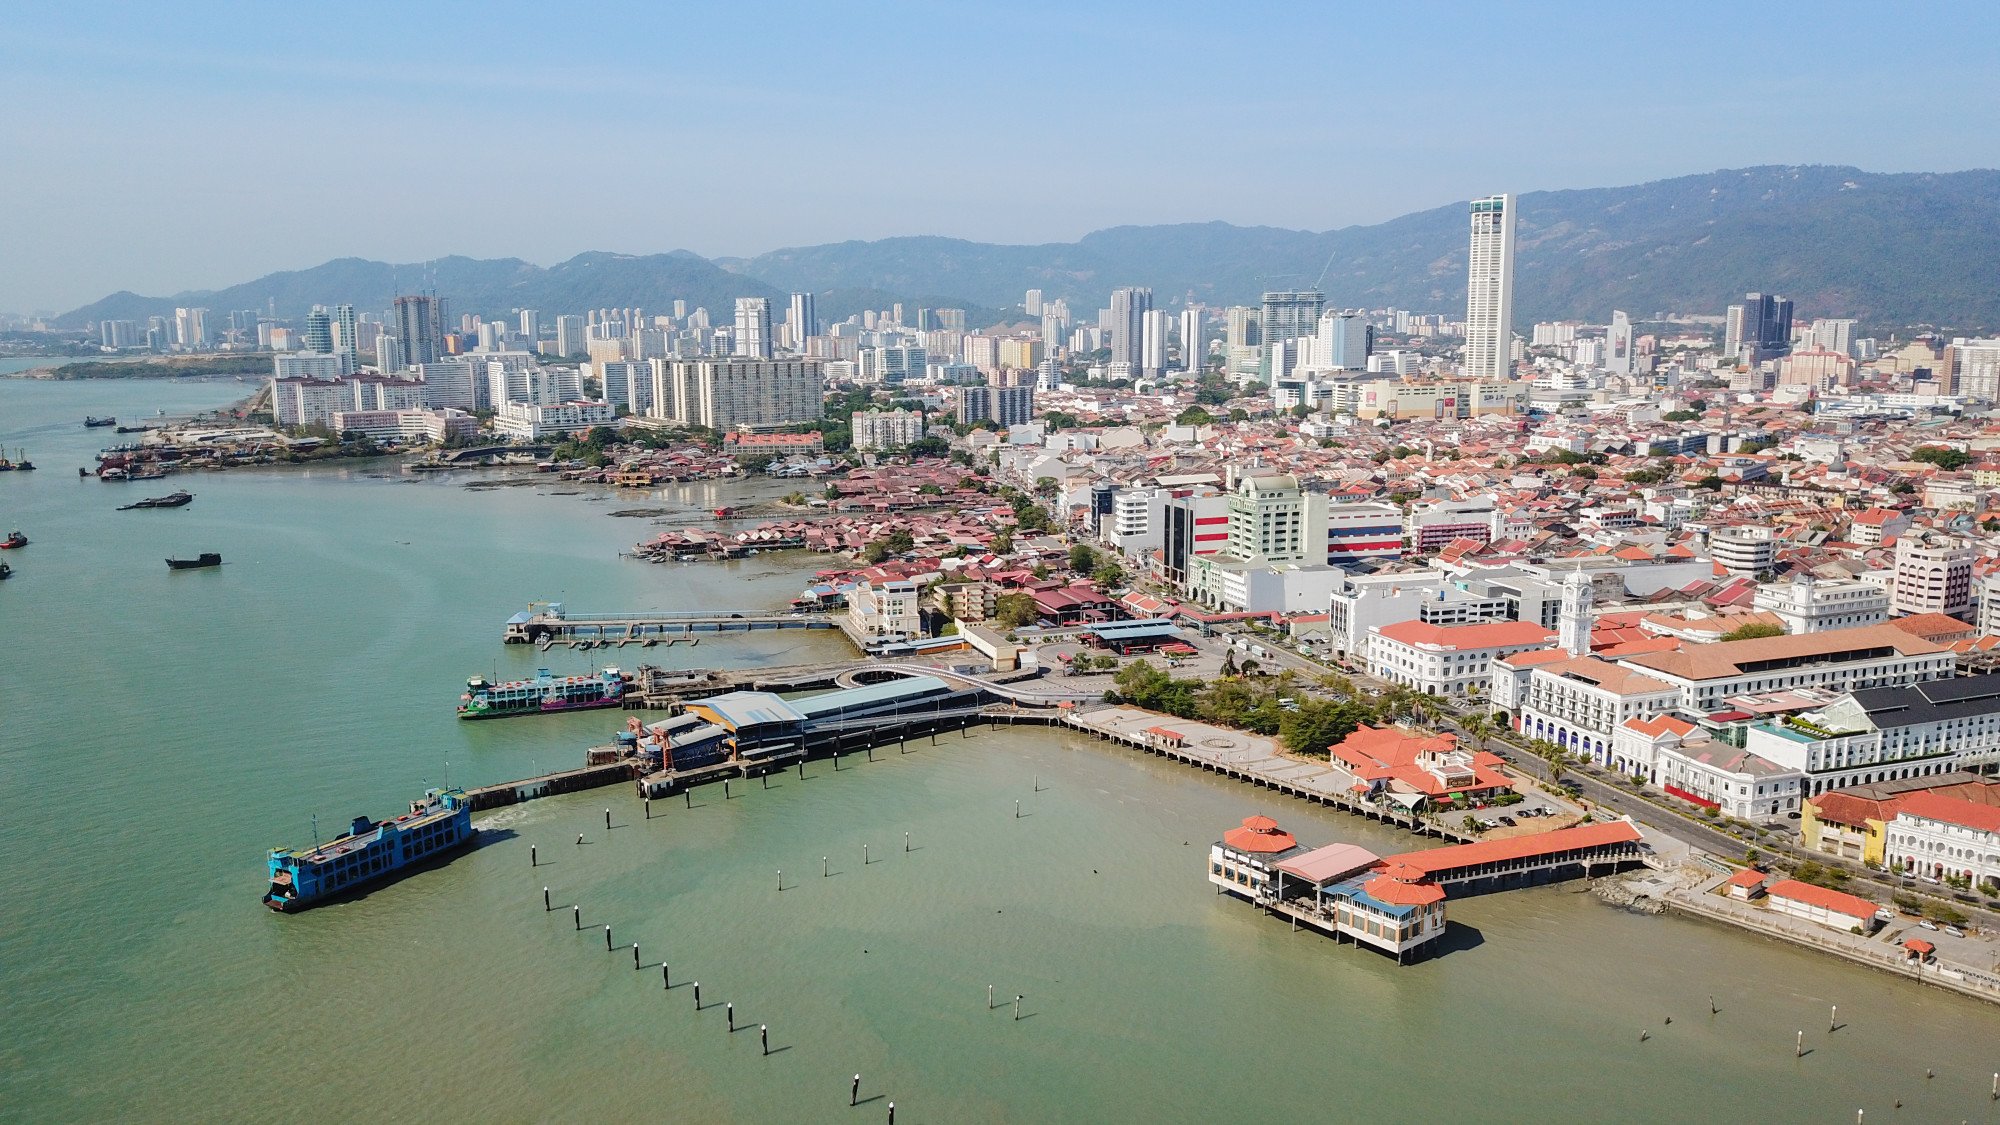 Penang was Malaysia’s fastest growing economy in 2021, with growth of 5.8 per cent. Photo: Shutterstock